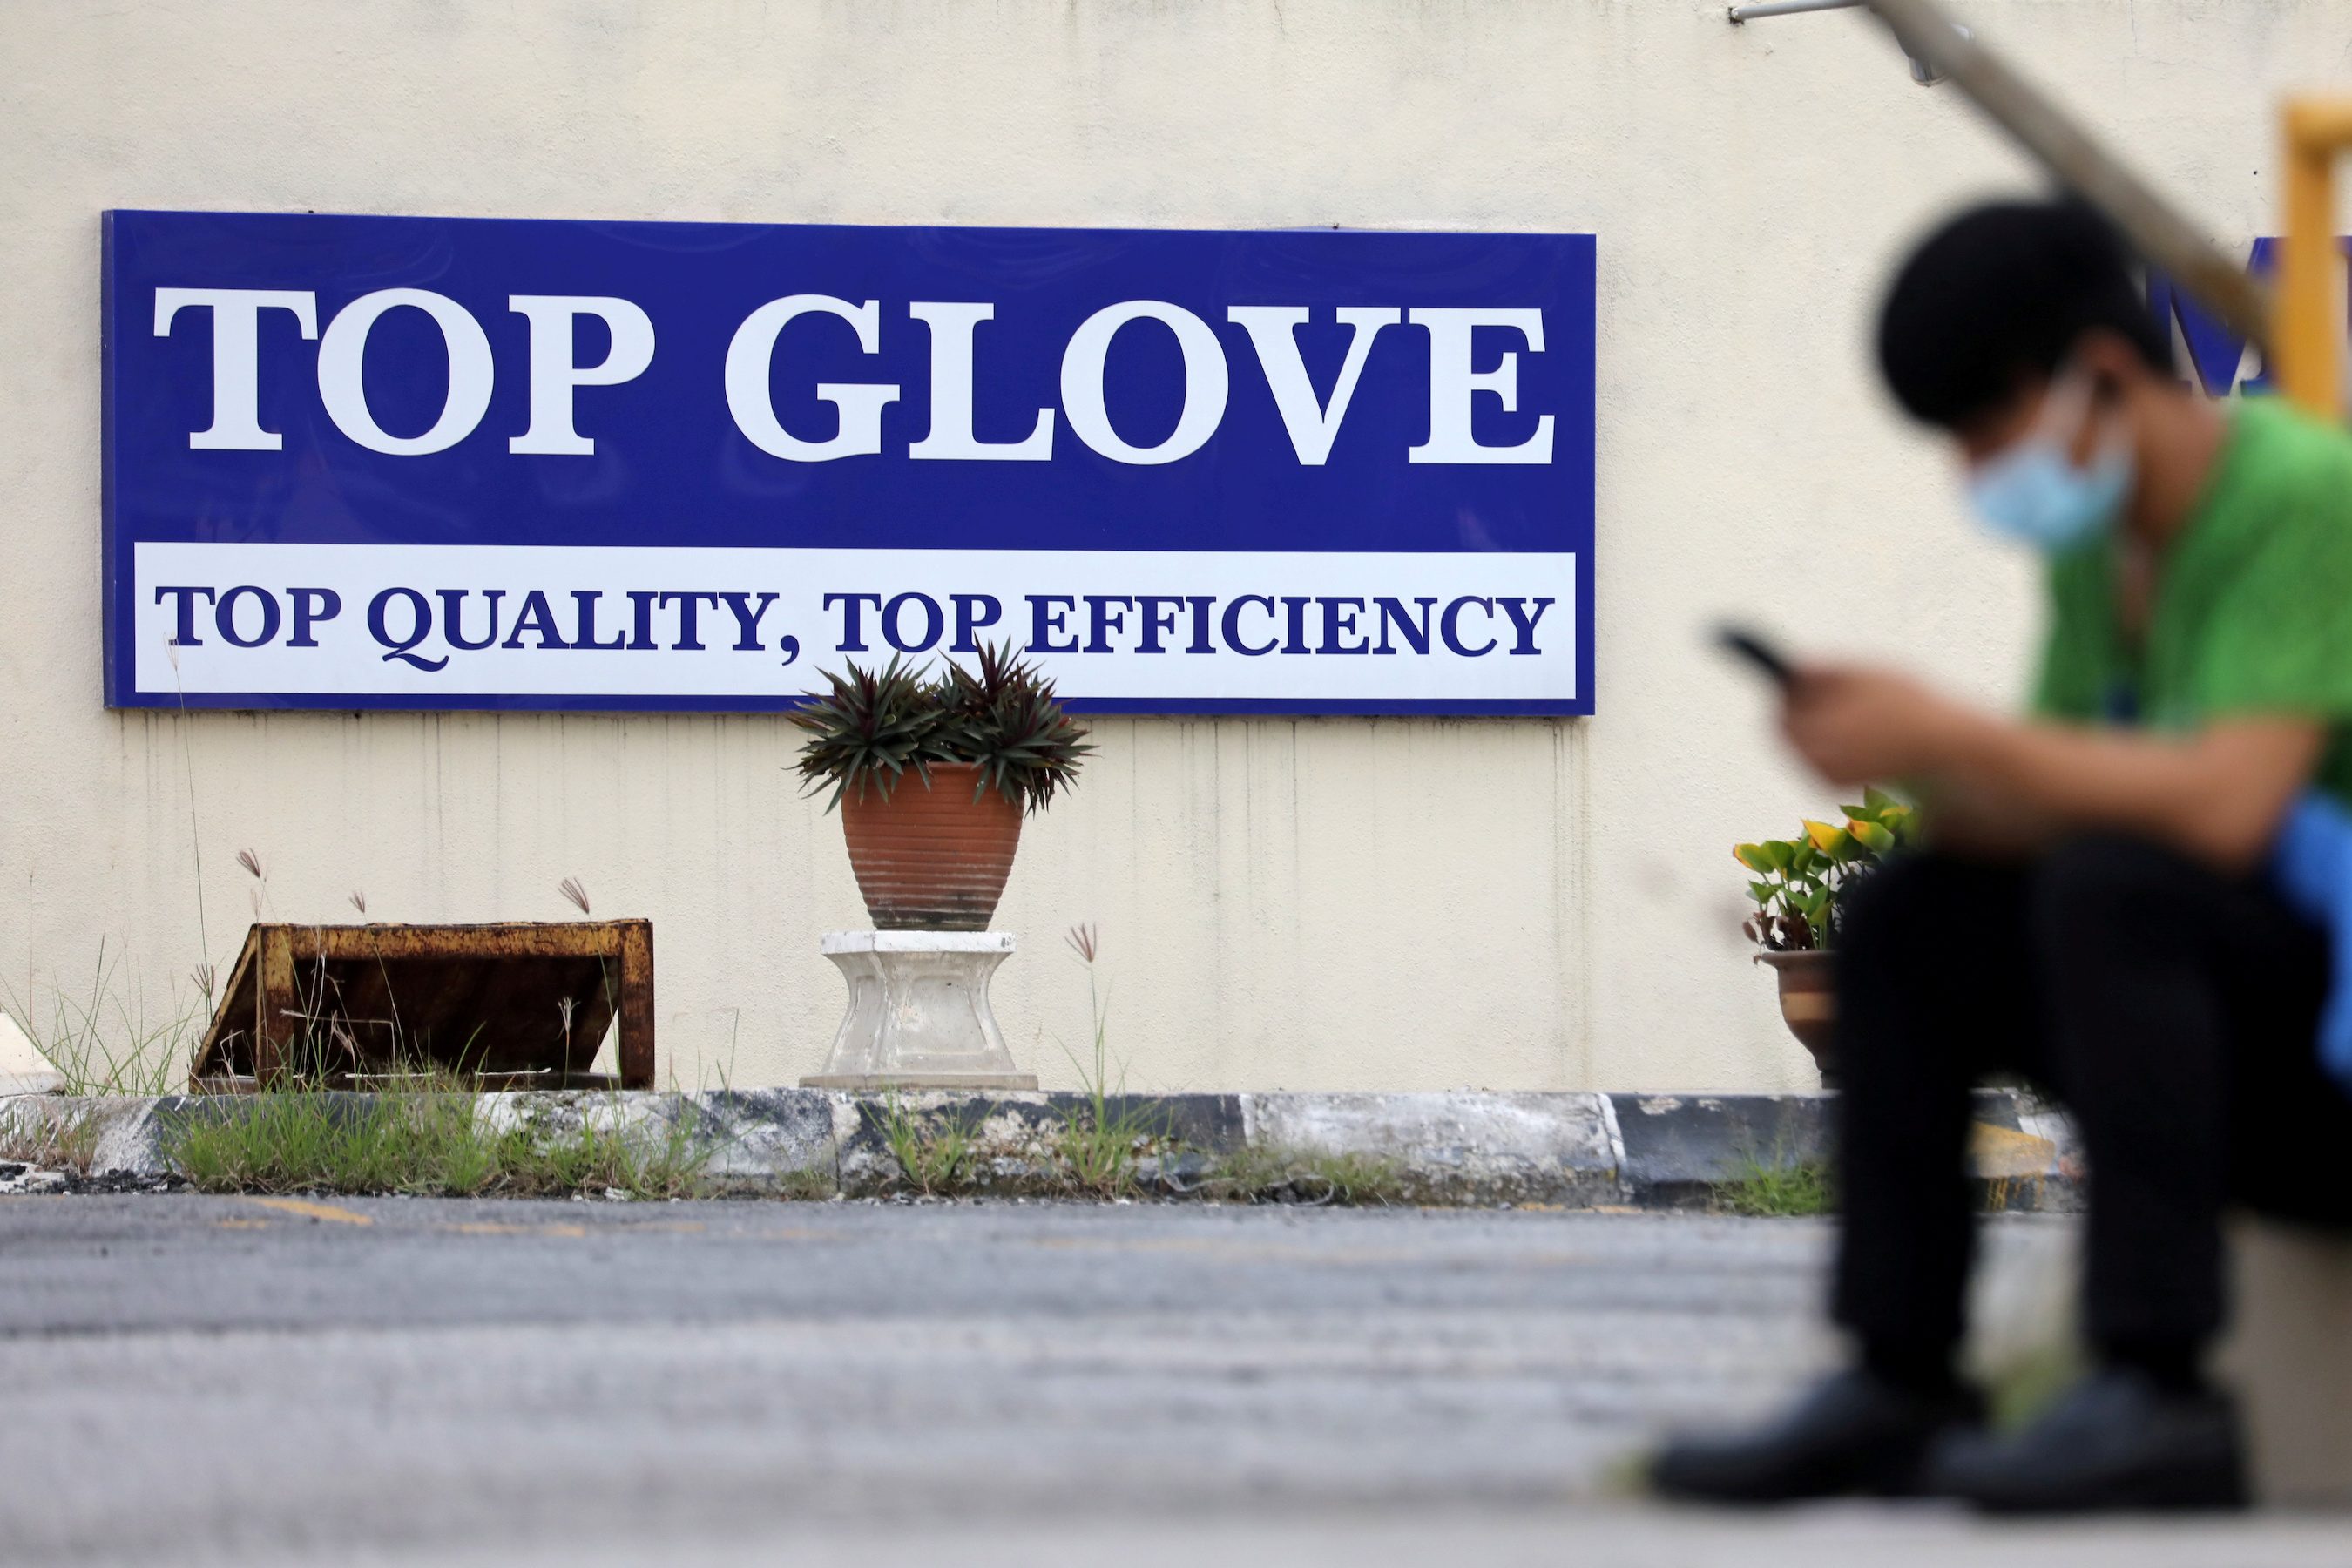 Malaysia’s Top Glove says no systemic forced labor found at firm, reports record profit